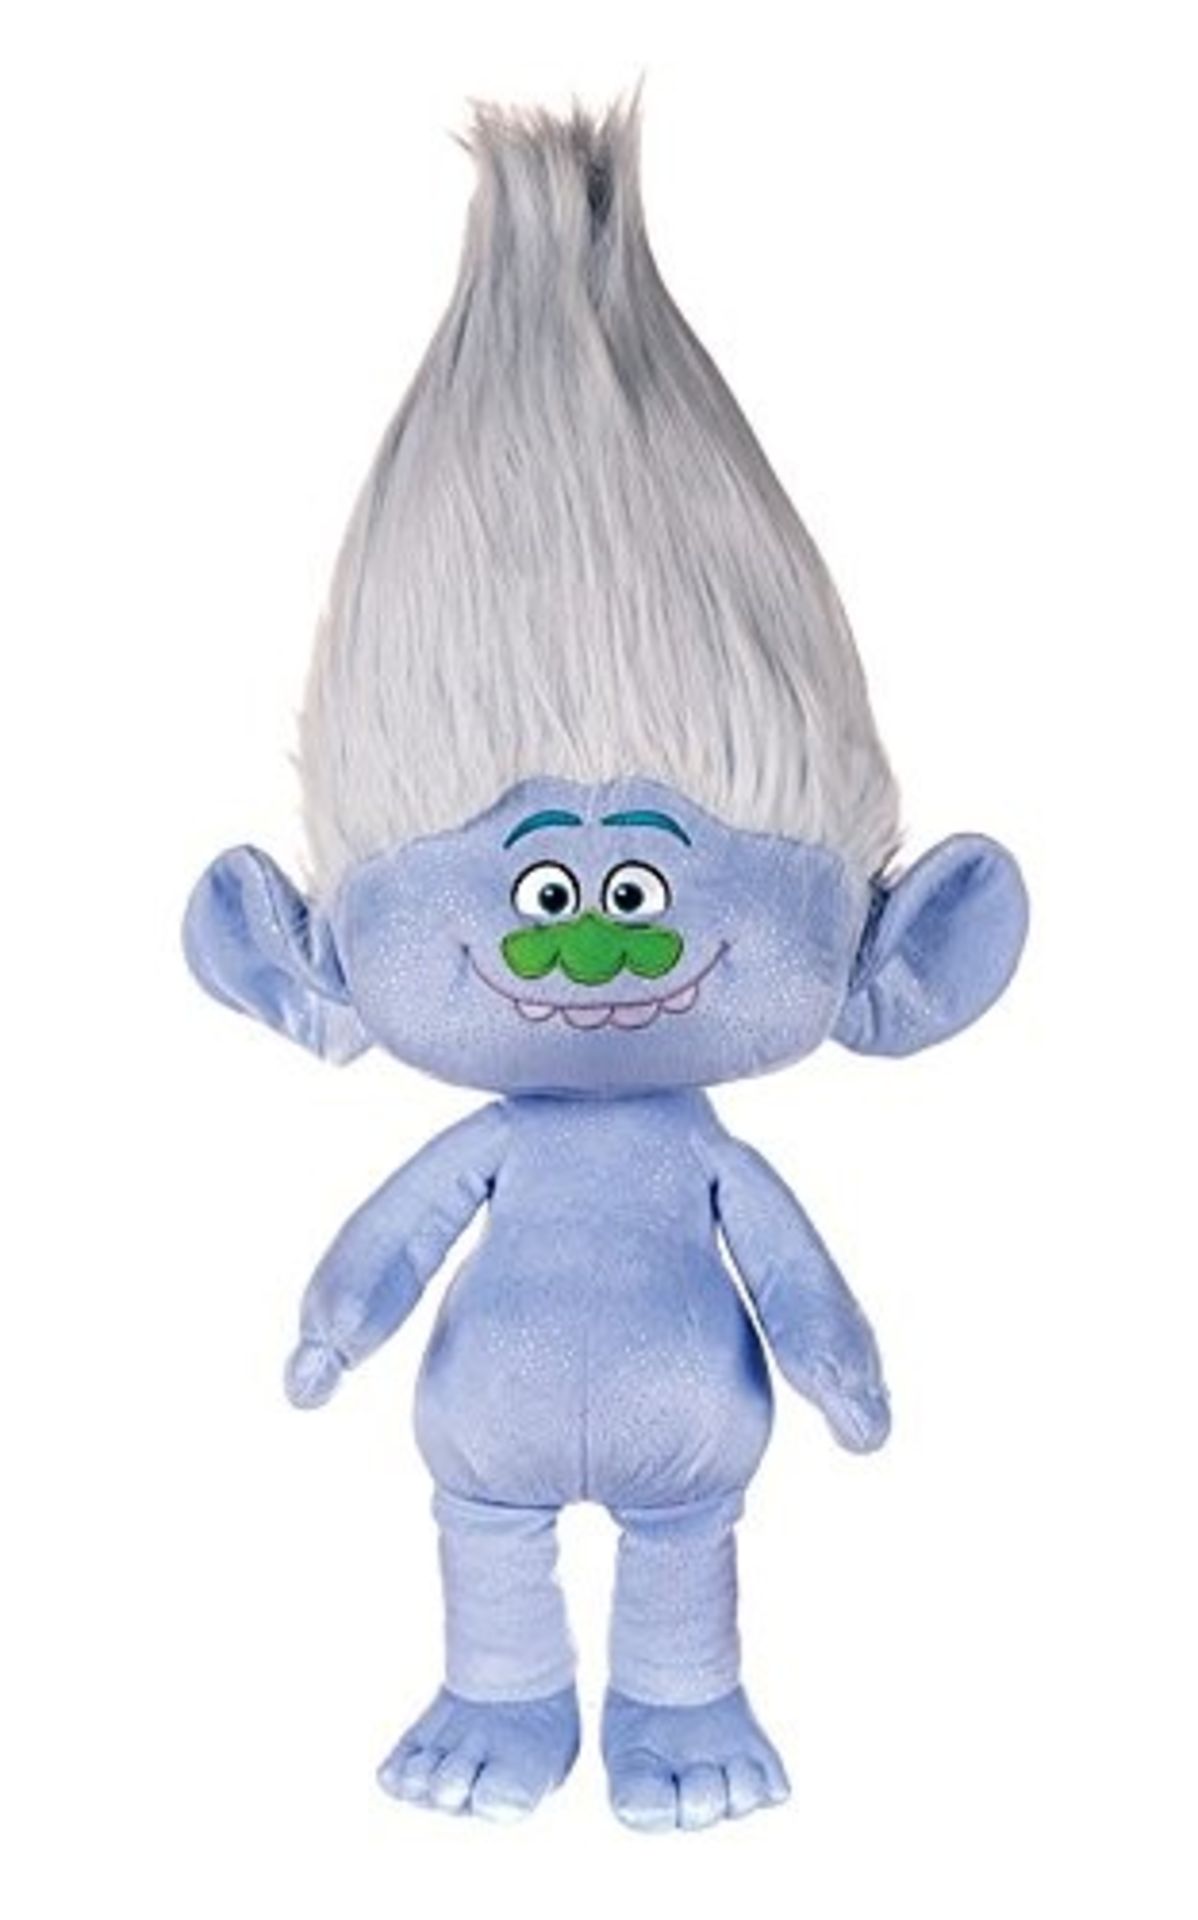 1 TROLLS PLUSH SOFT TOY APPROX 14" - GUY DIAMOND / RRP £12.00 (VIEWING HIGHLY RECOMMENDED)